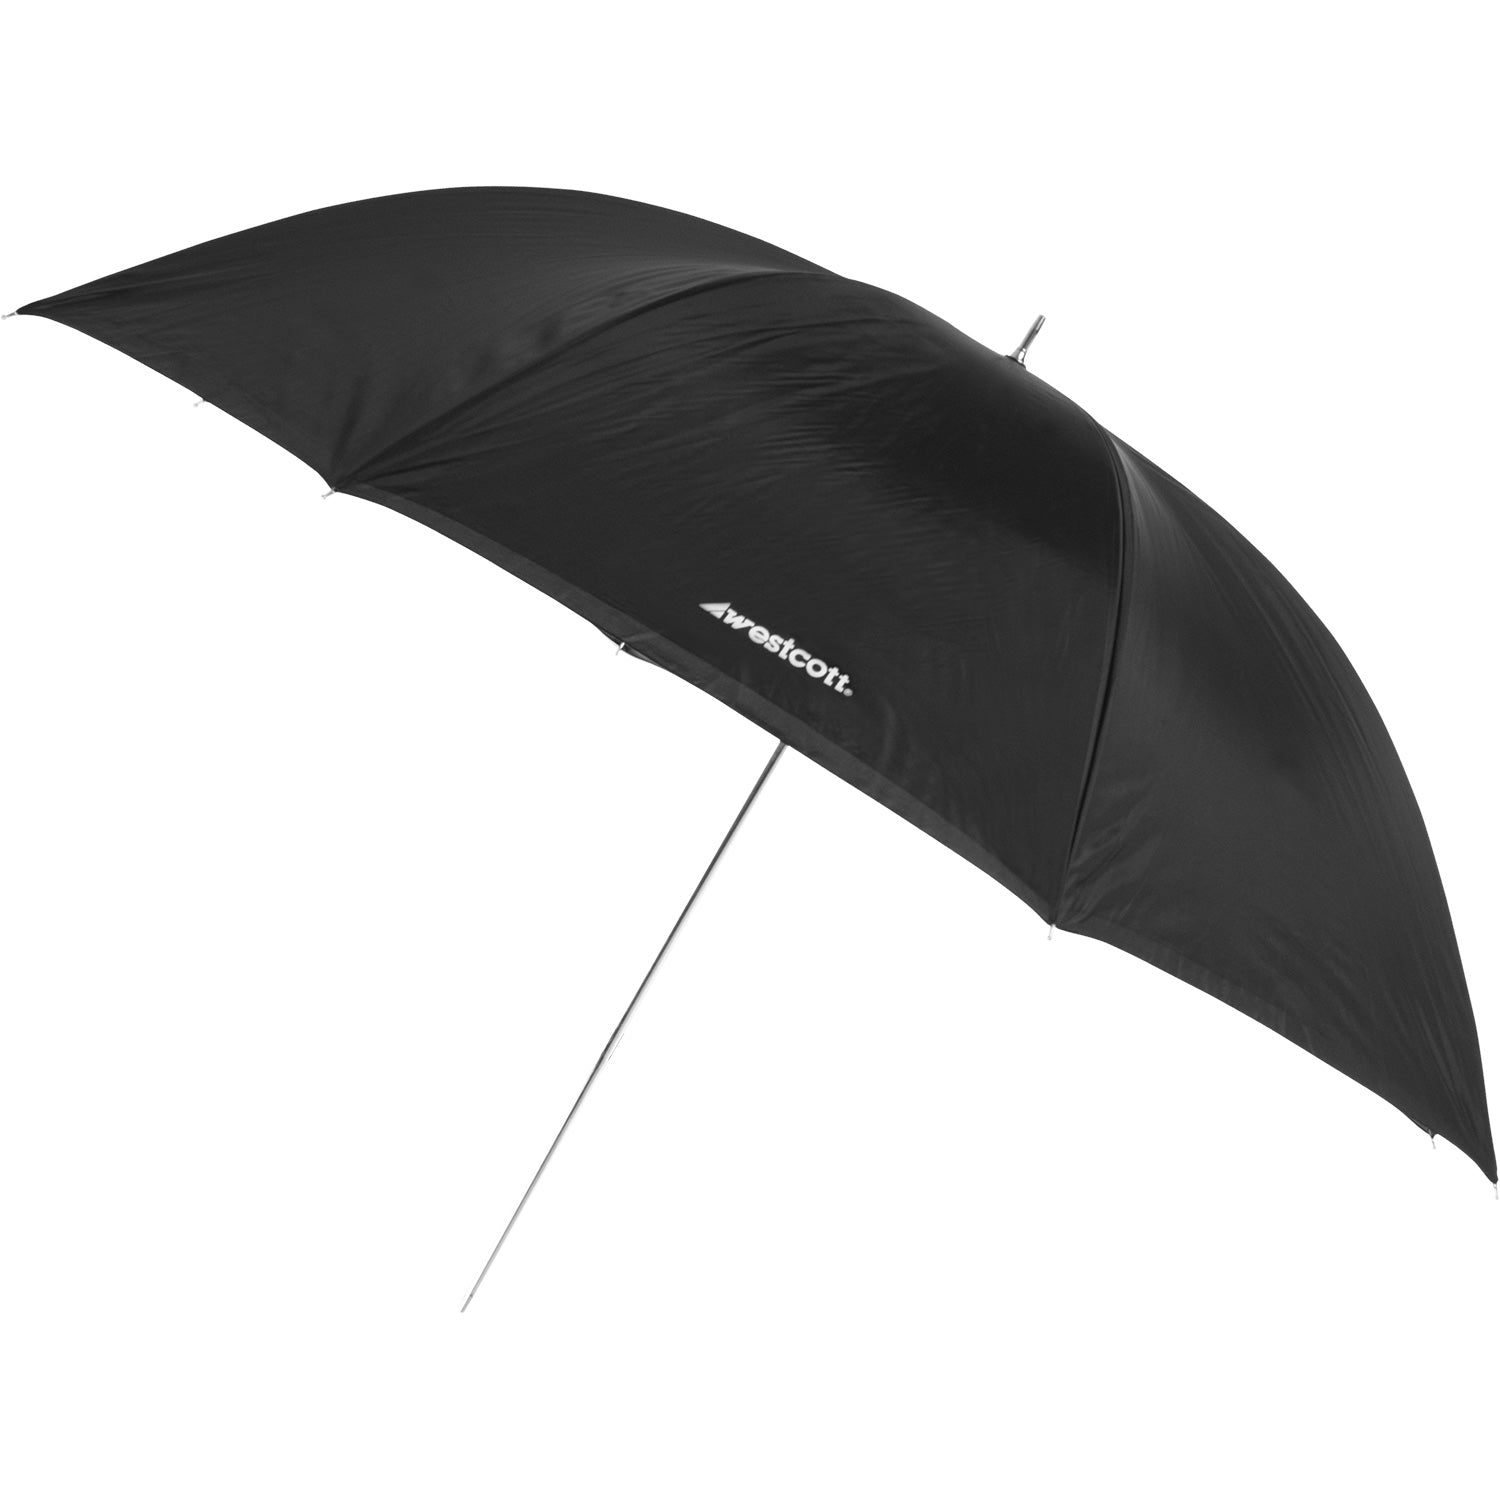 Convertible Umbrella - Optical White Satin with Removable Black Cover (60")